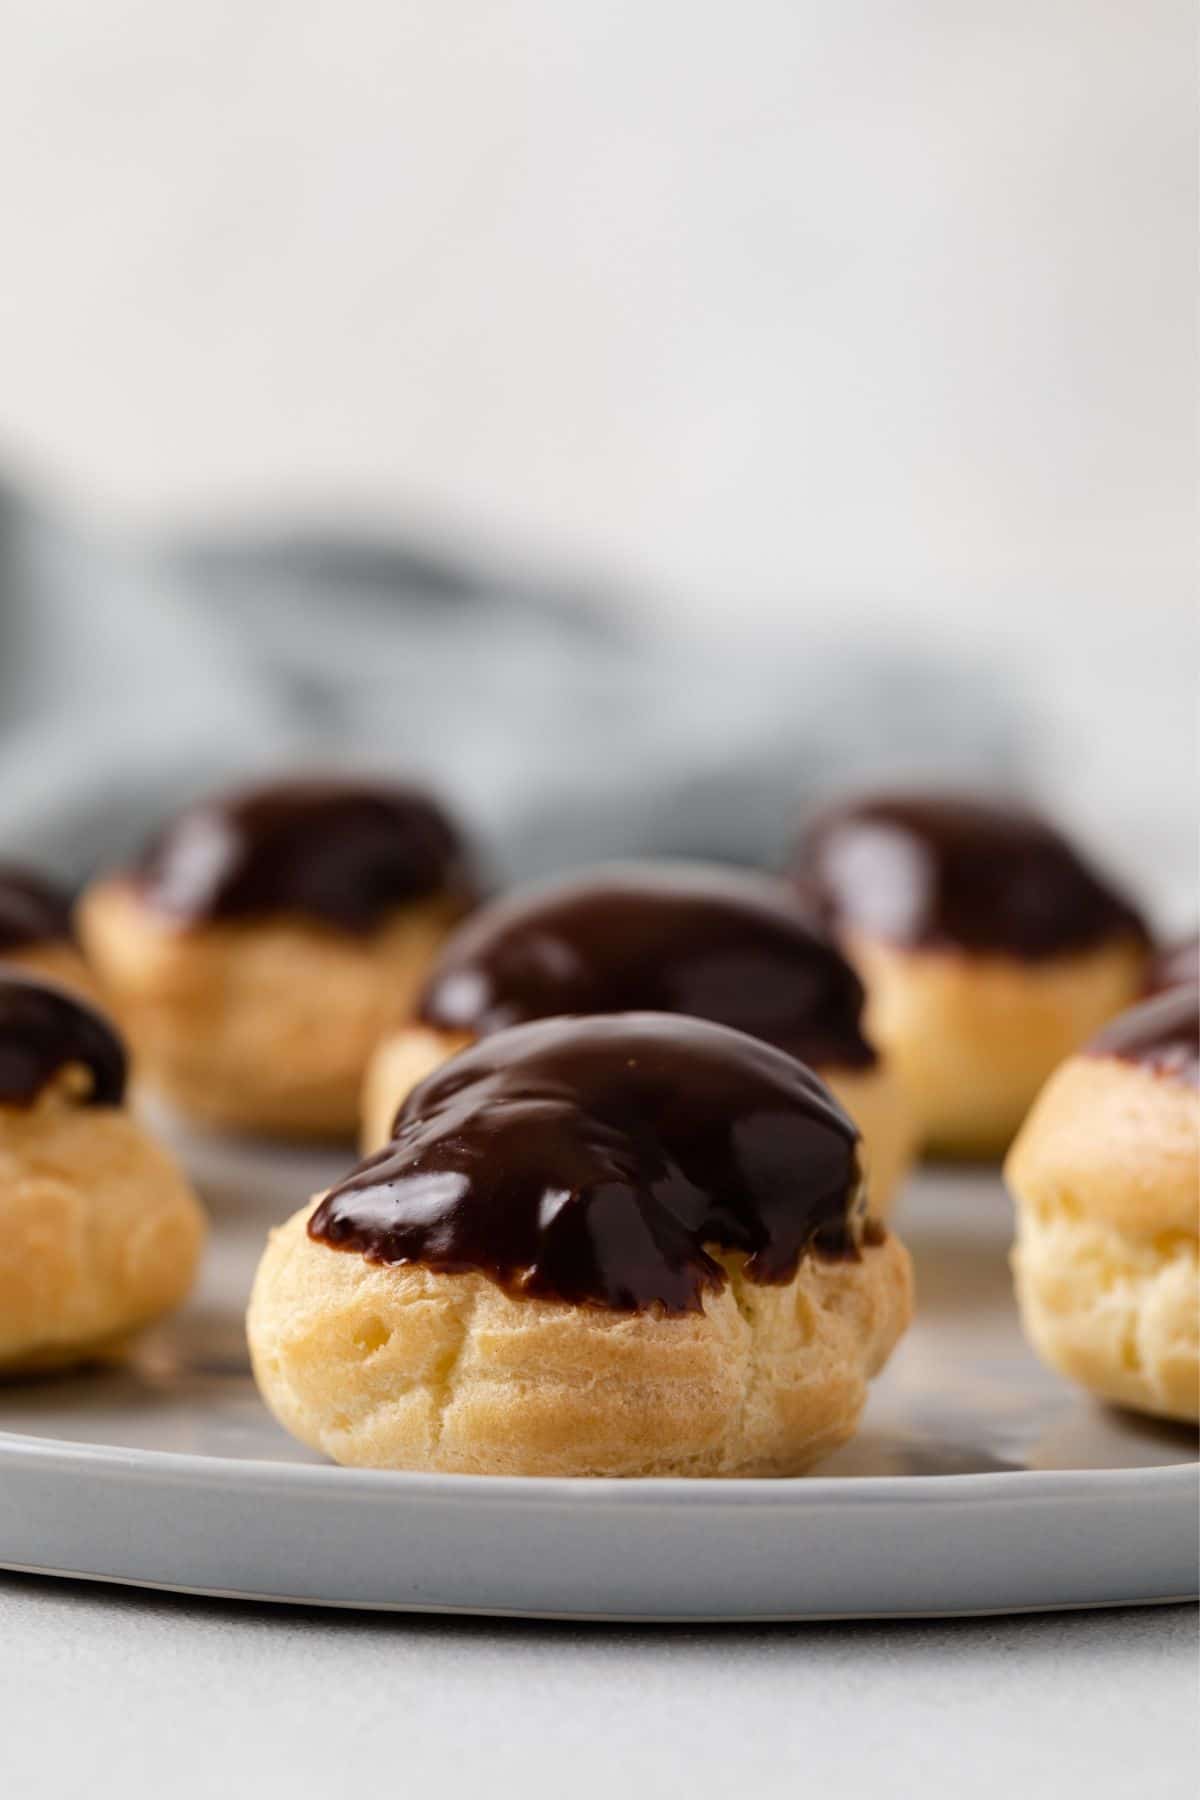 Side view of profiteroles topped with chocolate glaze.